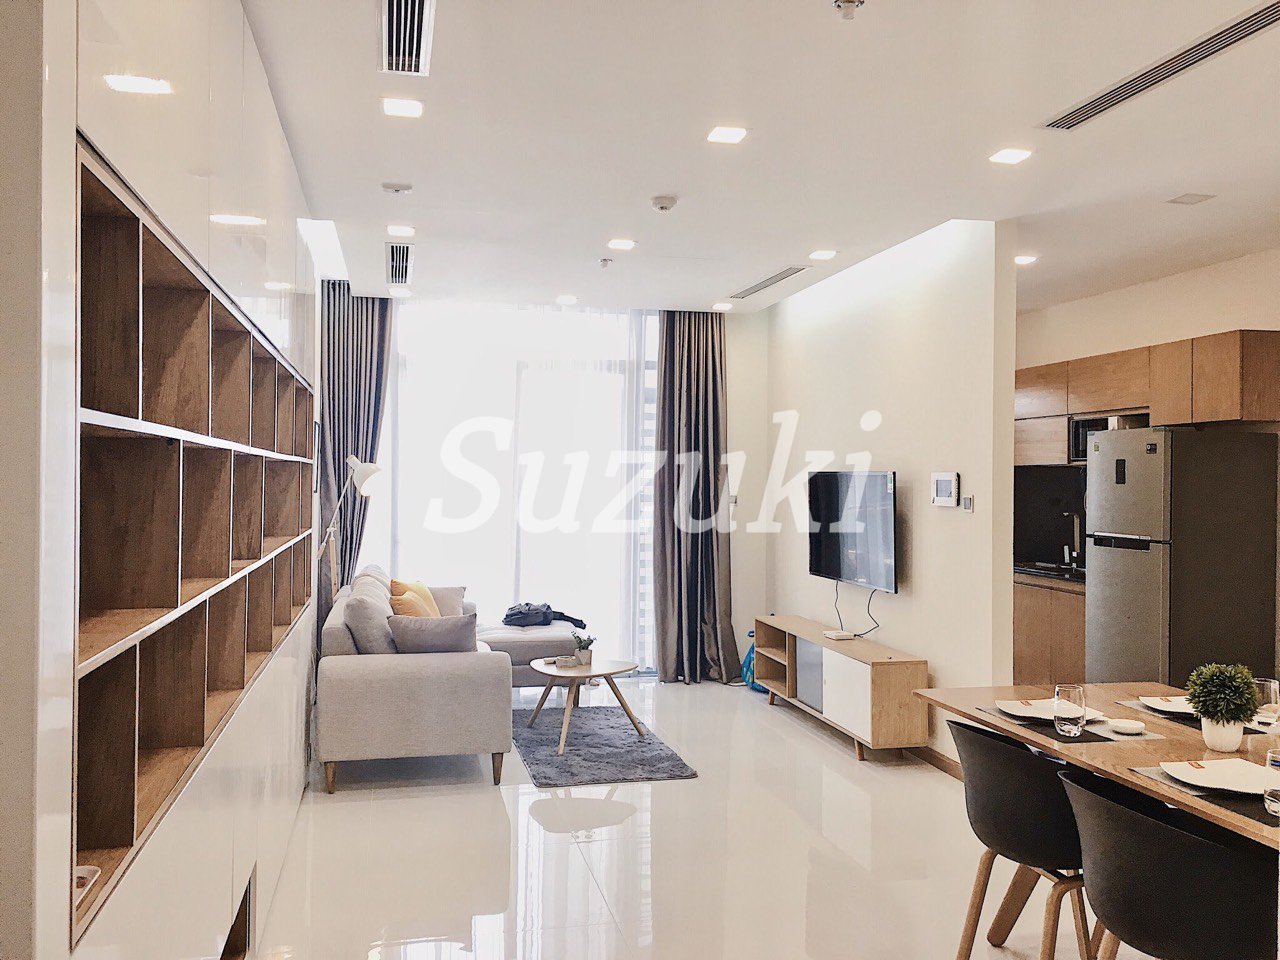 Vin Group shopping mall attached | 2LDK for rent 80 sqm-1100$-ST105P3436